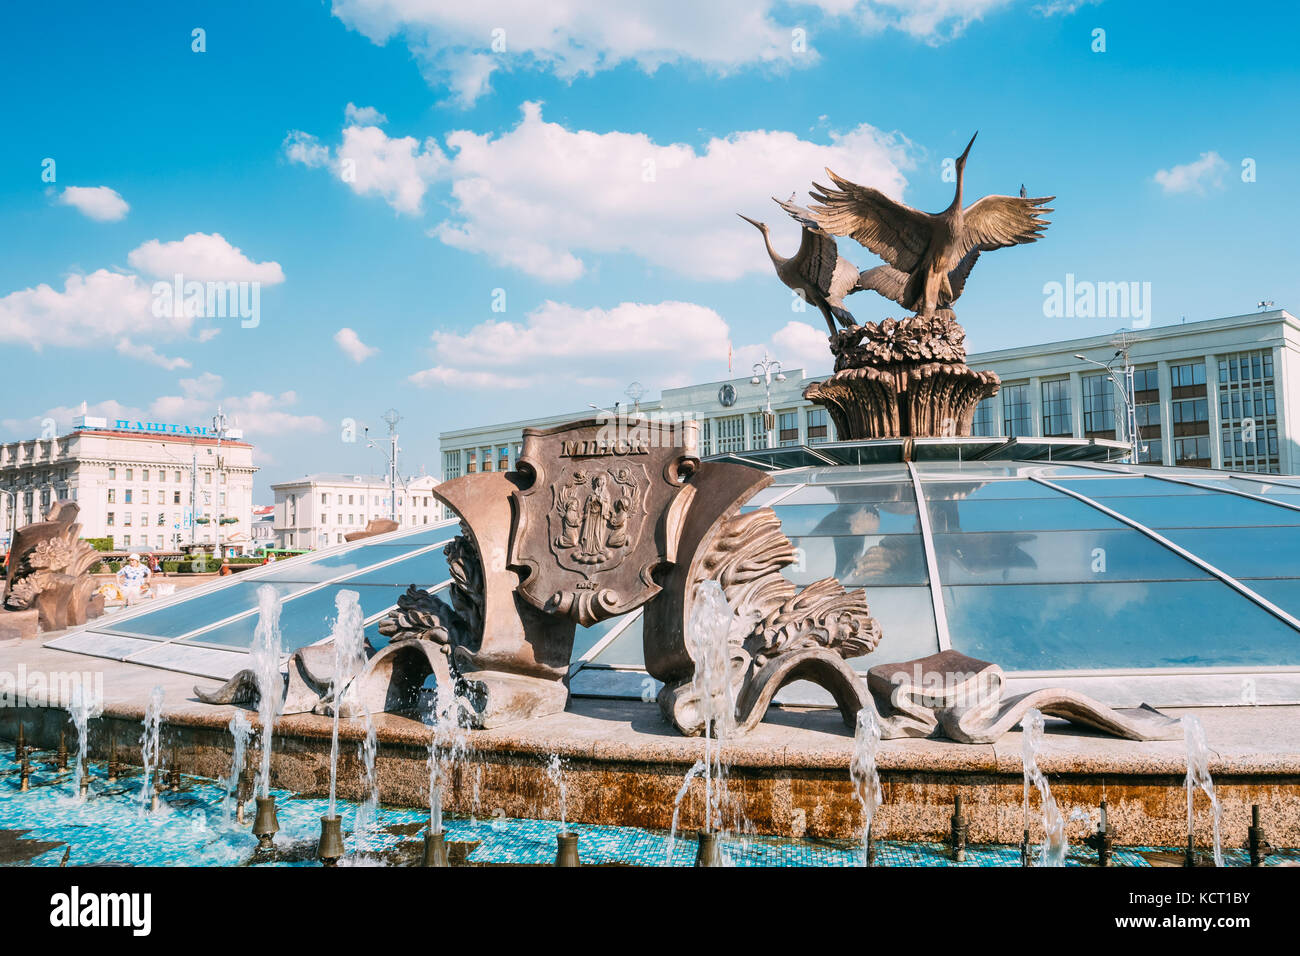 Minsk, Belarus. Bronze Sculptures Near Fountains: Coat Of Arms Of Minsk And Three Storks Cranes On Top Of Glass Dome Of Stolitsa, Underground Shopping Stock Photo